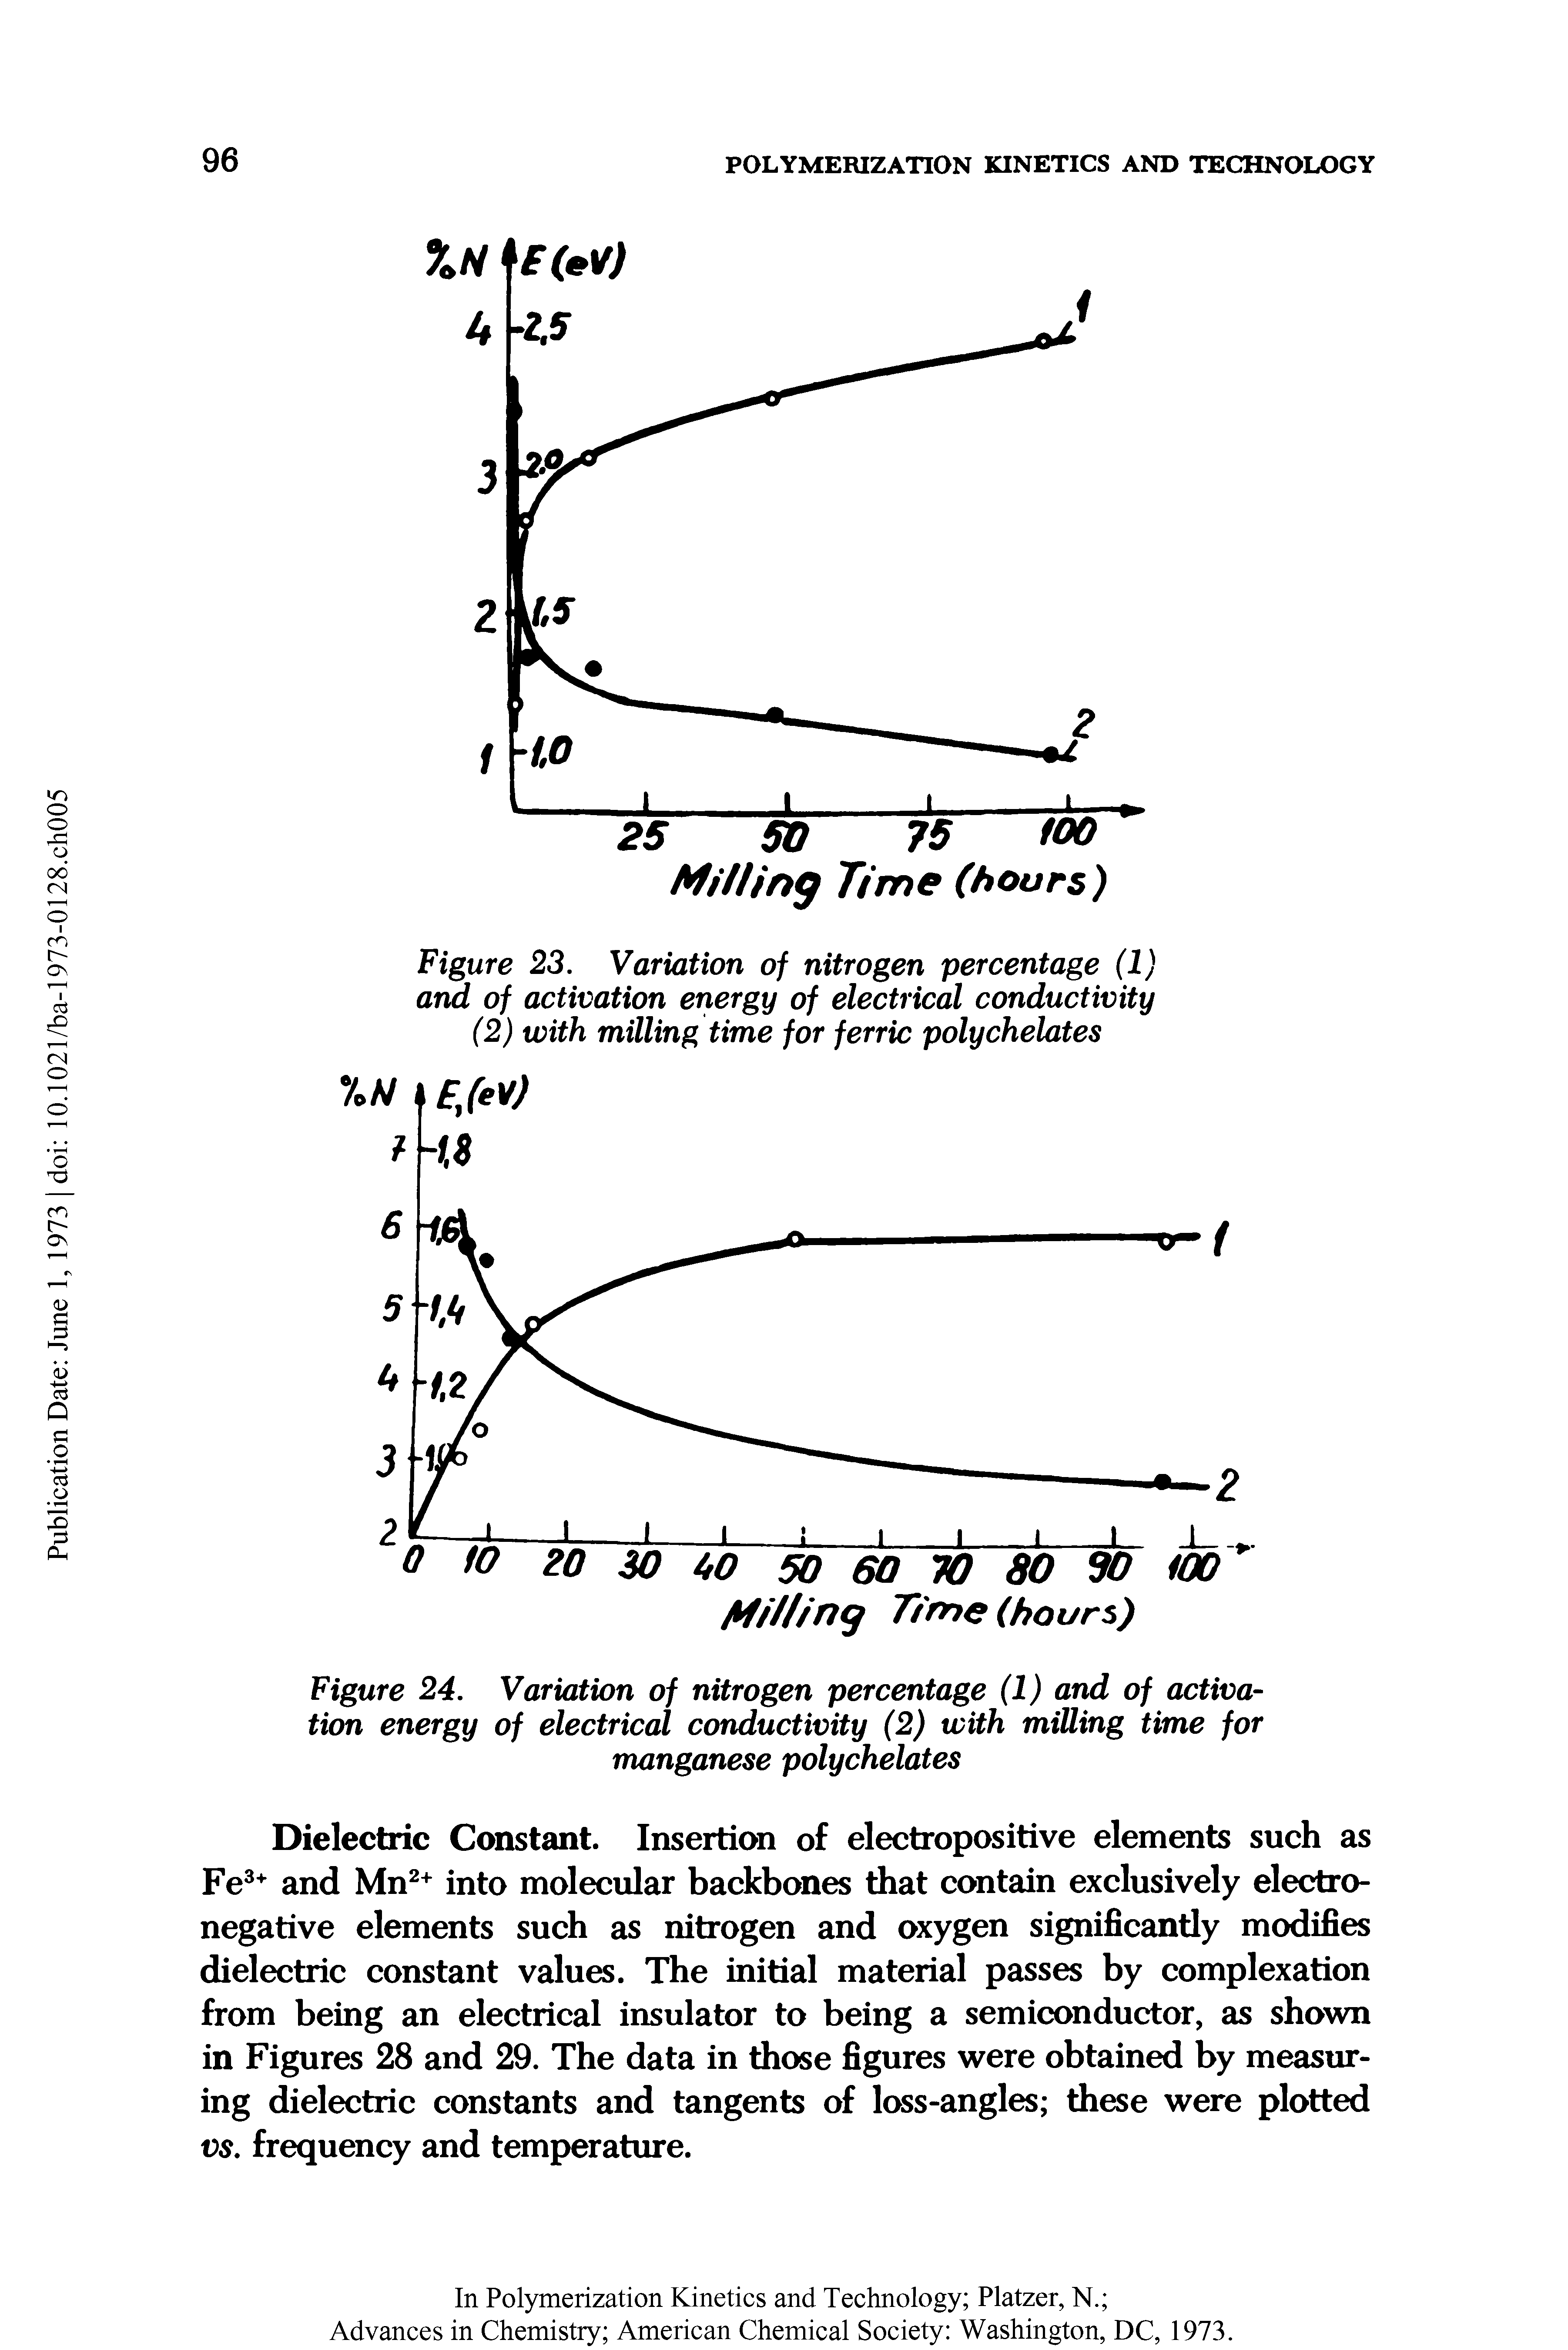 Figure 23. Variation of nitrogen percentage (1) and of activation energy of electrical conductivity (2) with milling time for ferric polychelates...